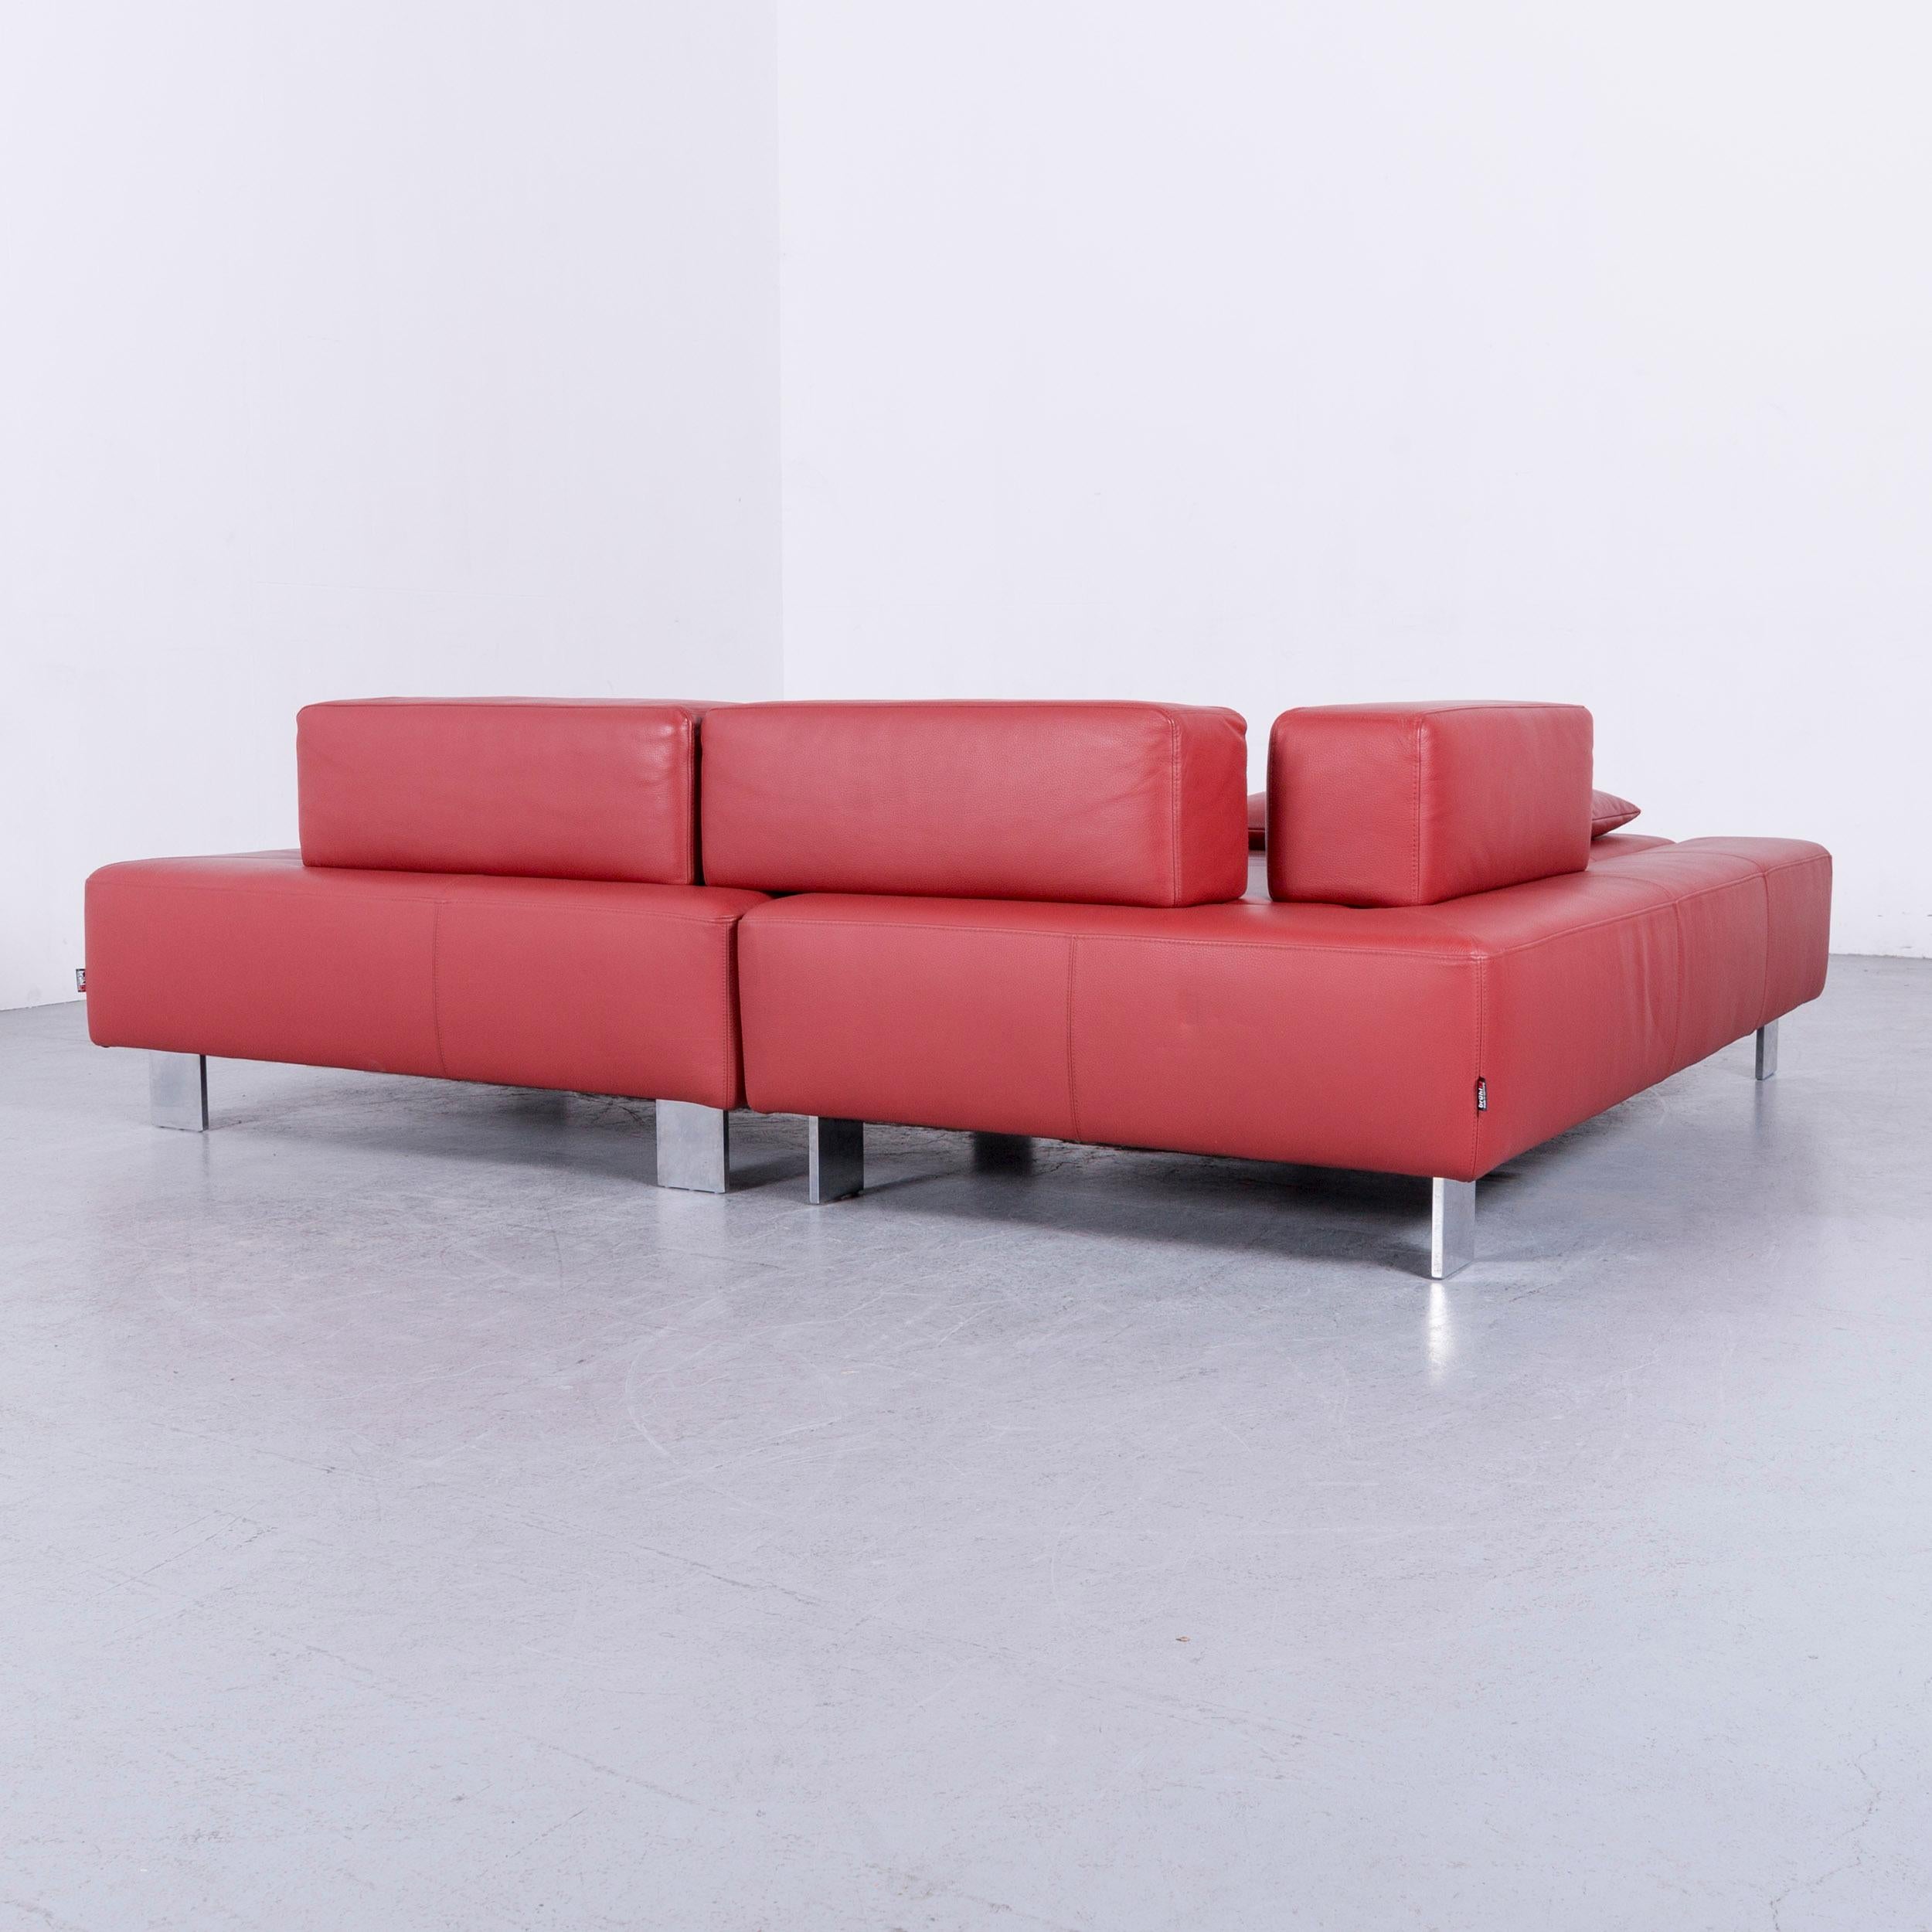 Brühl & Sippold Fields Designer Sofa Red Leather Corner Sofa with Function For Sale 5